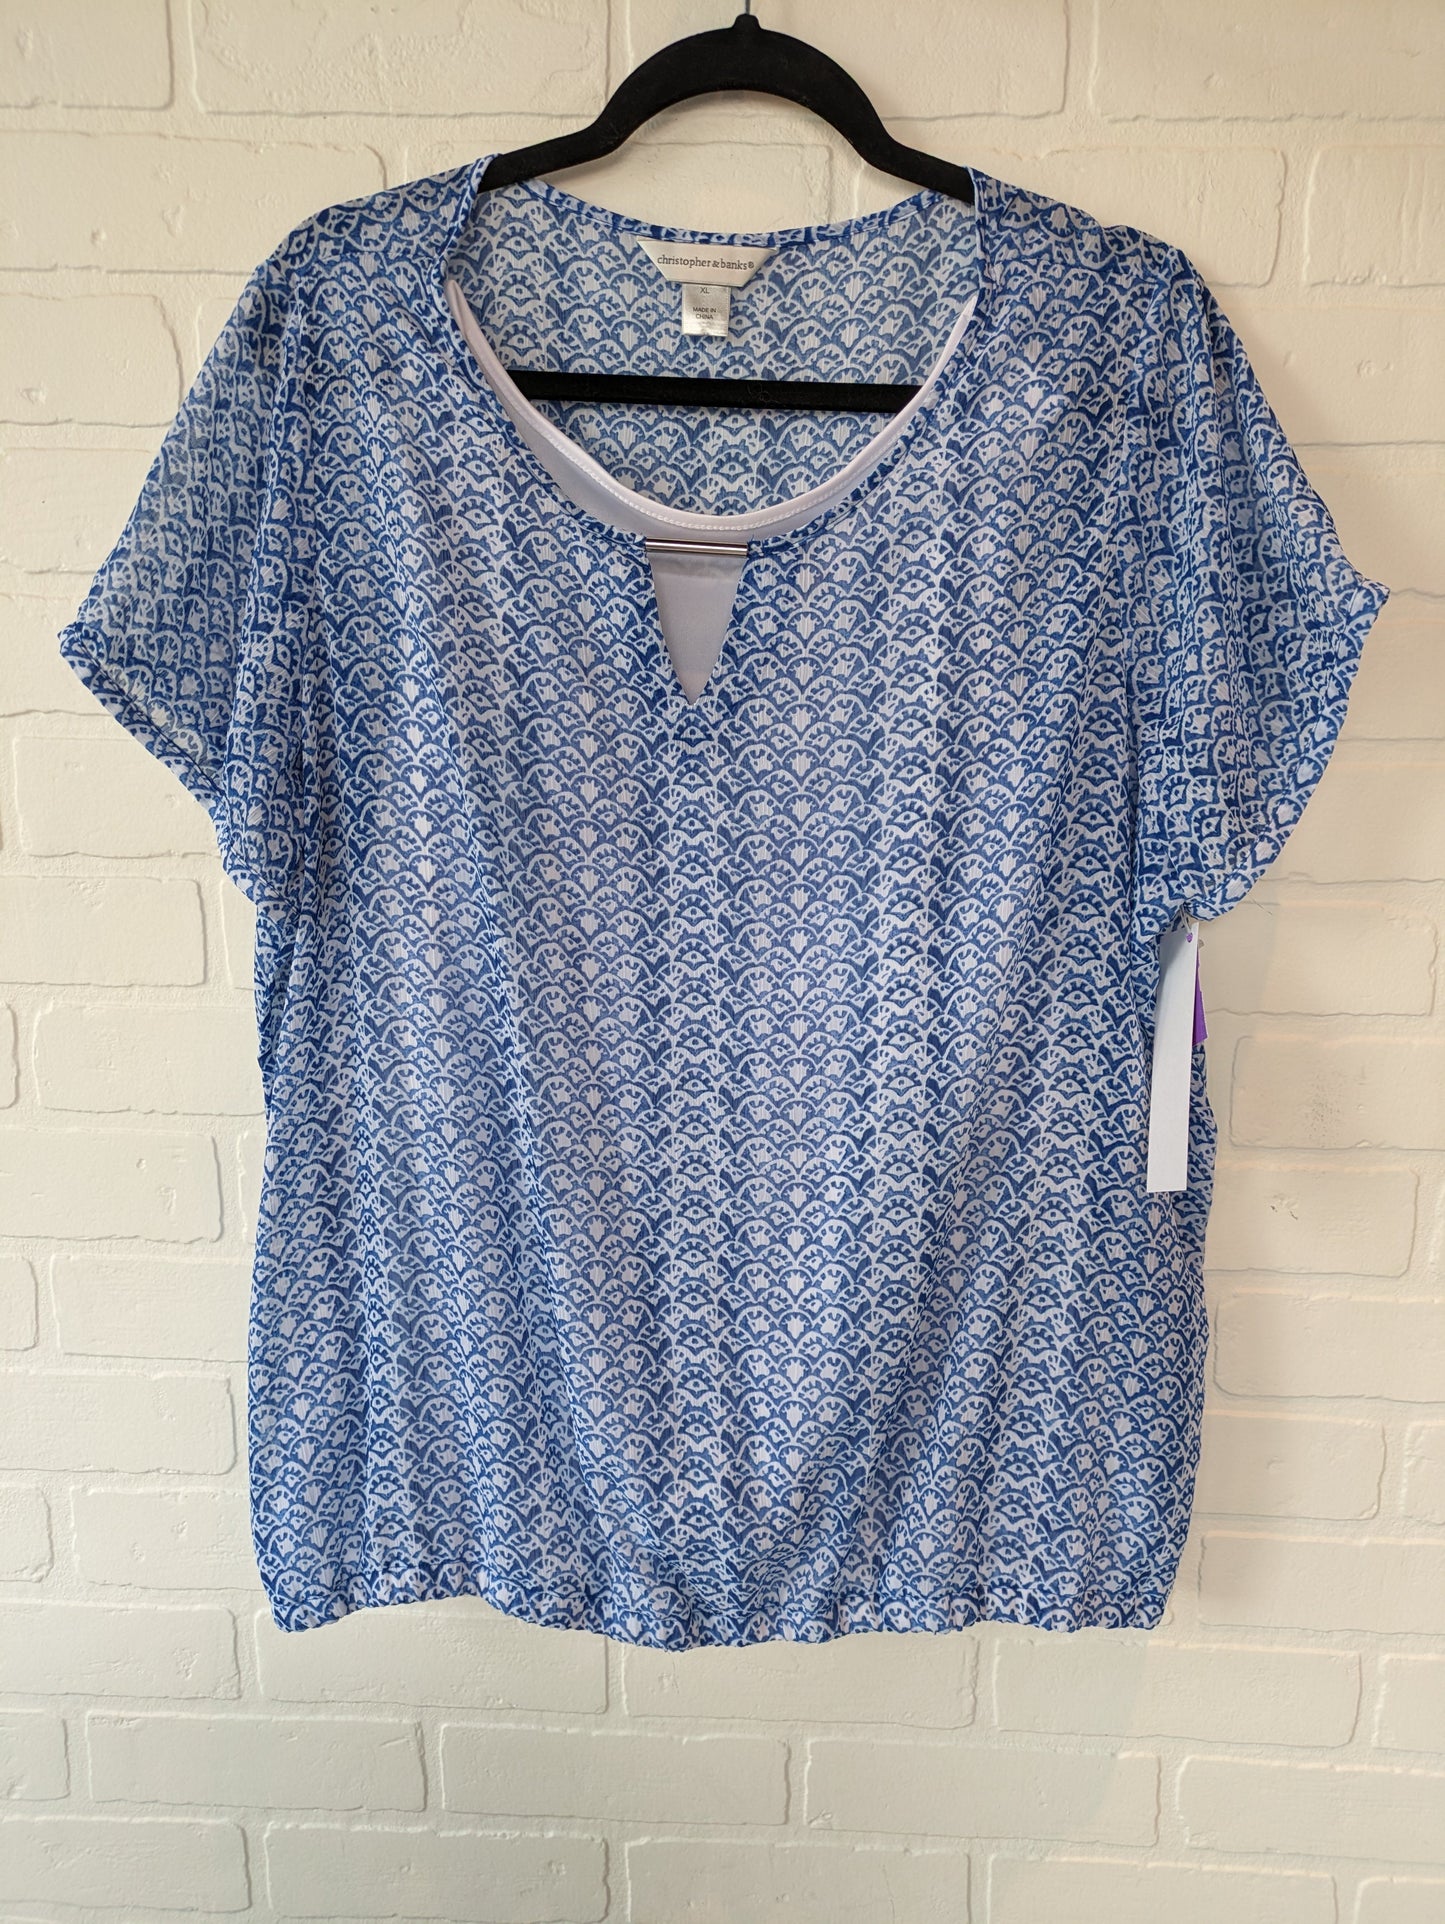 Blue Top Short Sleeve Christopher And Banks, Size Xl